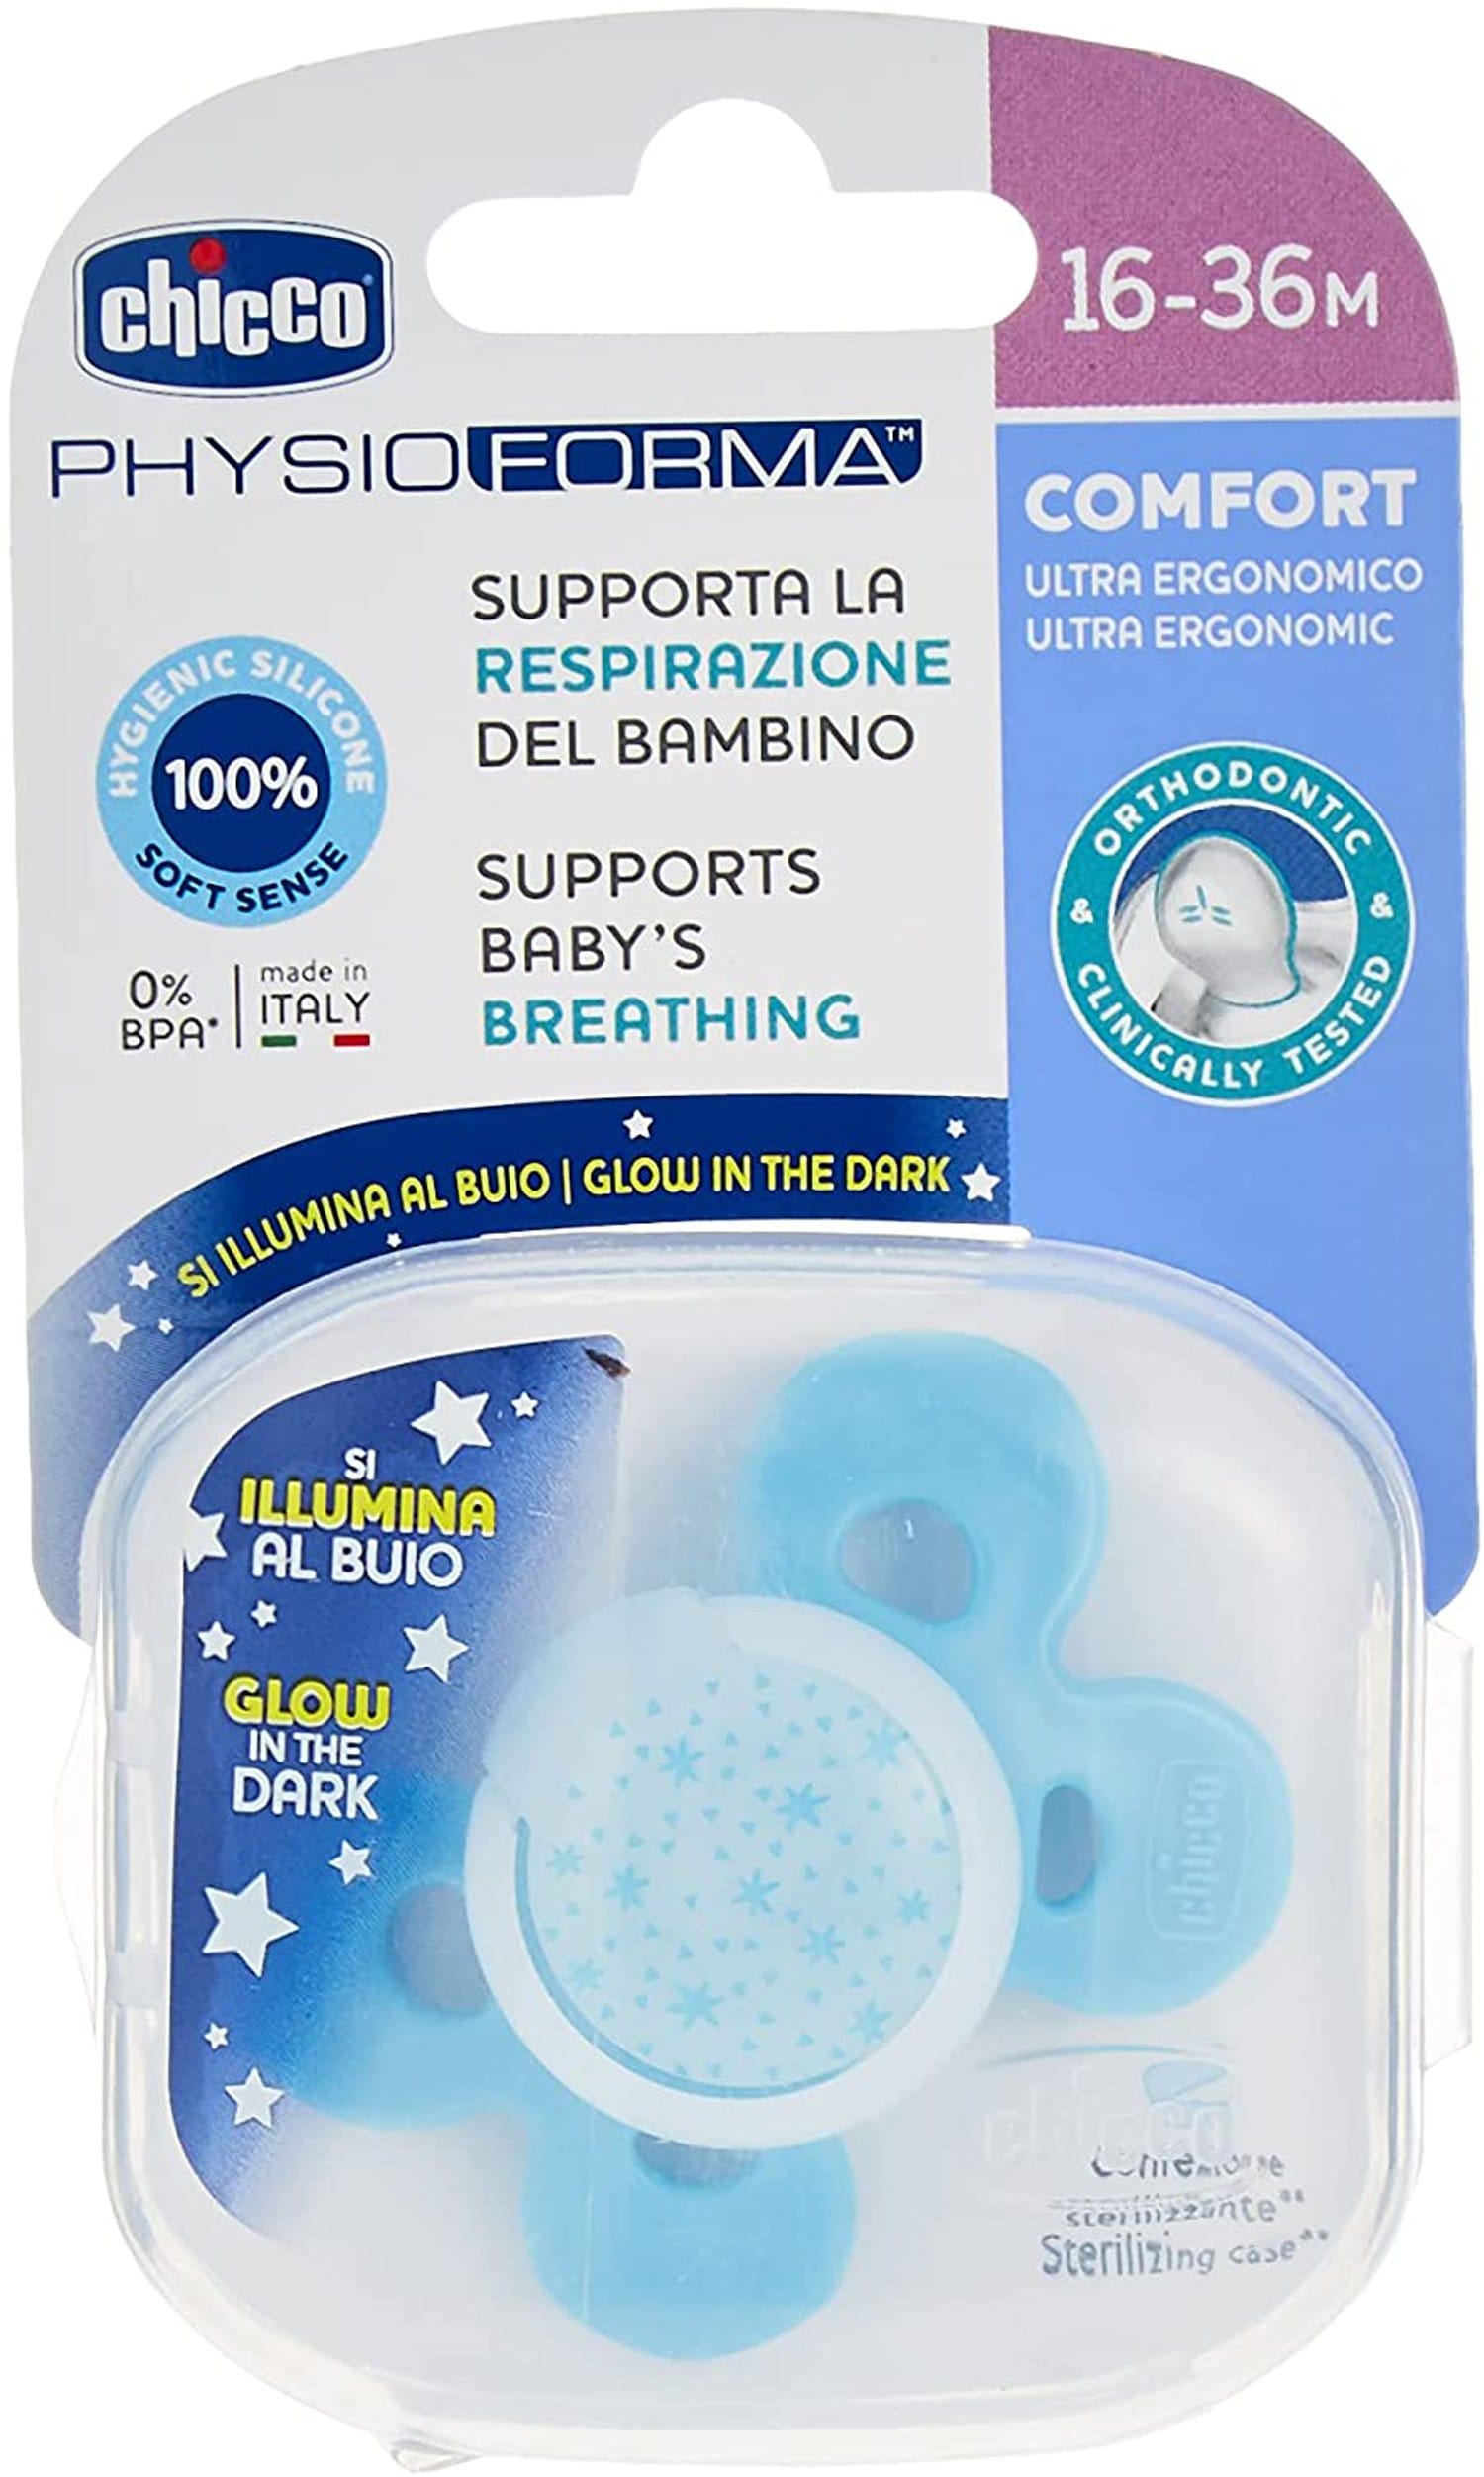 CHICCO PHYSIOFORMA COMFORT SILICONE BABY PACIFIER 16-36M 1 PC LUMI NIGHT